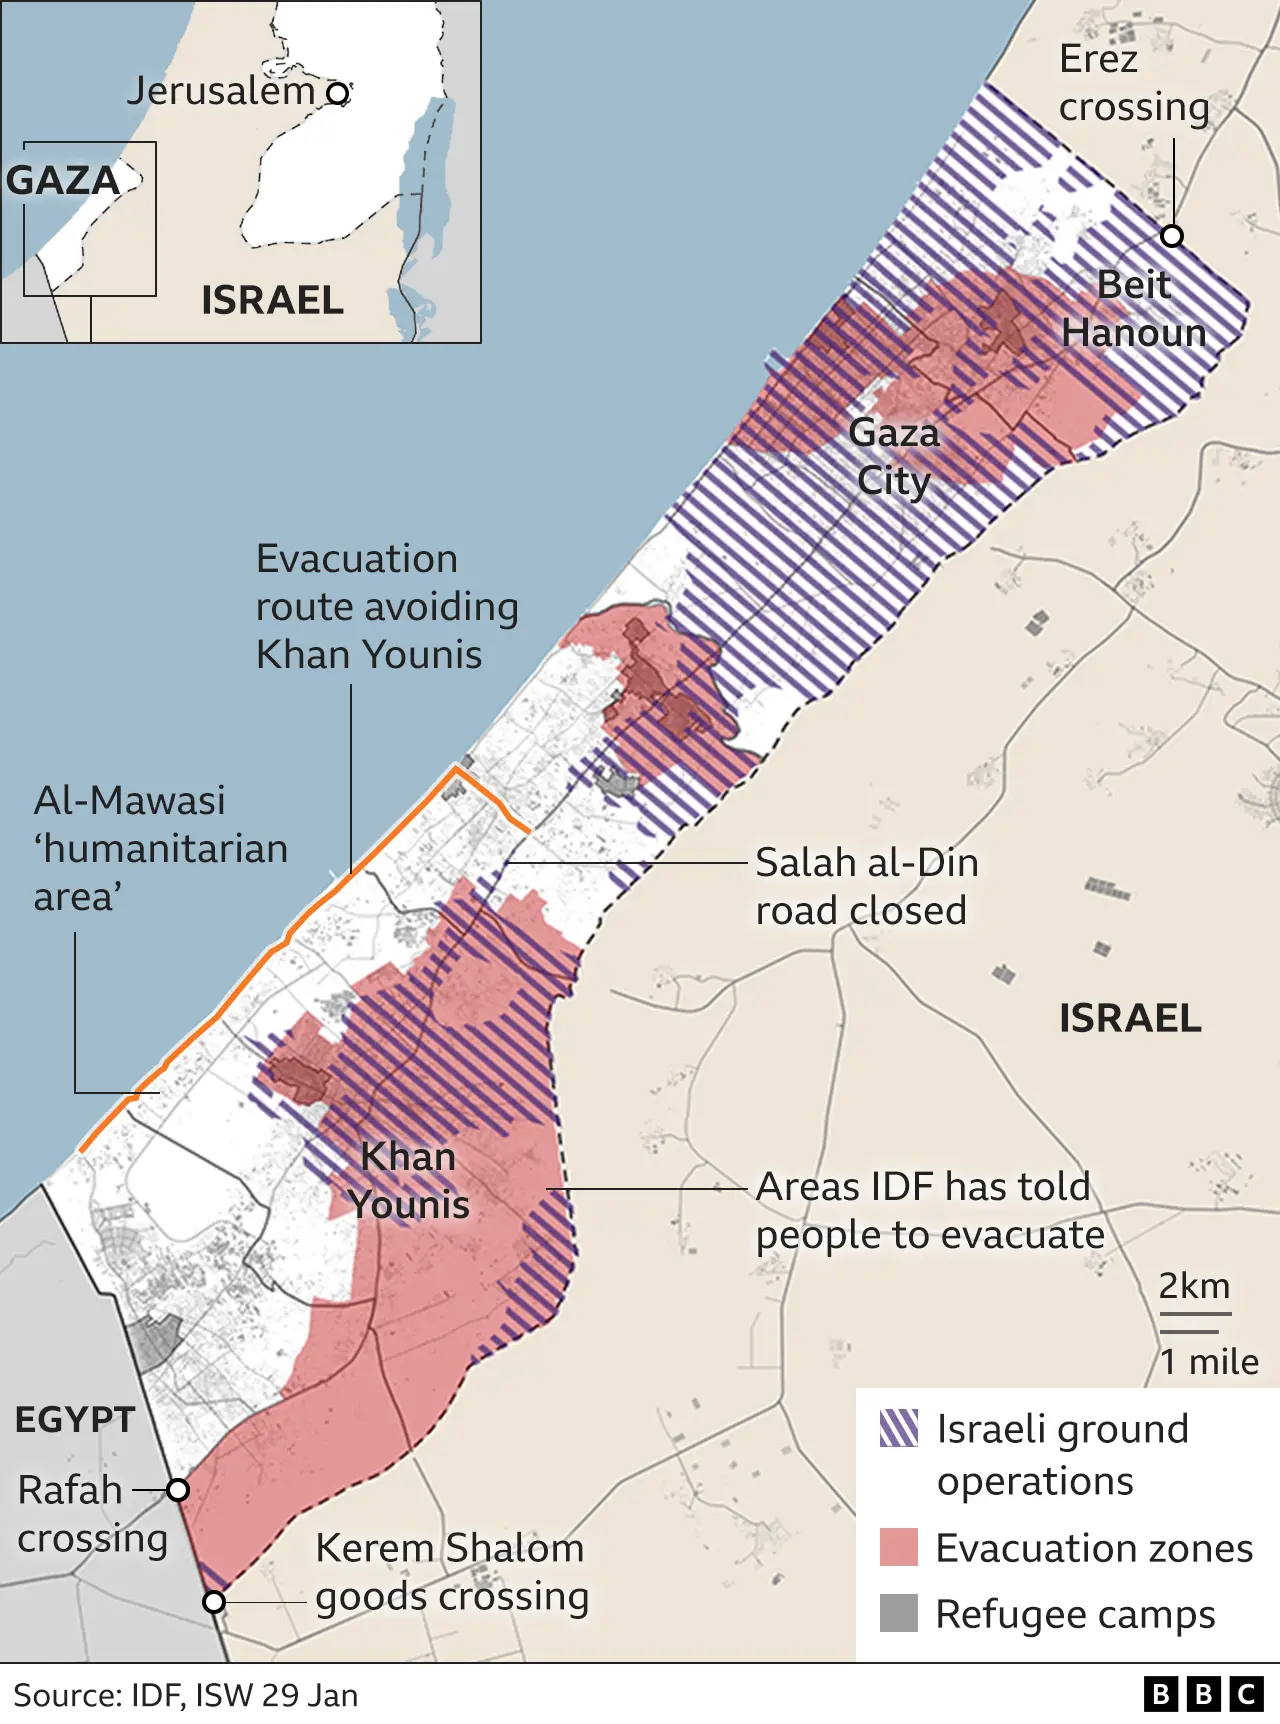 Map of Gaza showing areas of IDF ground operations, evacuation zones and refugee camps